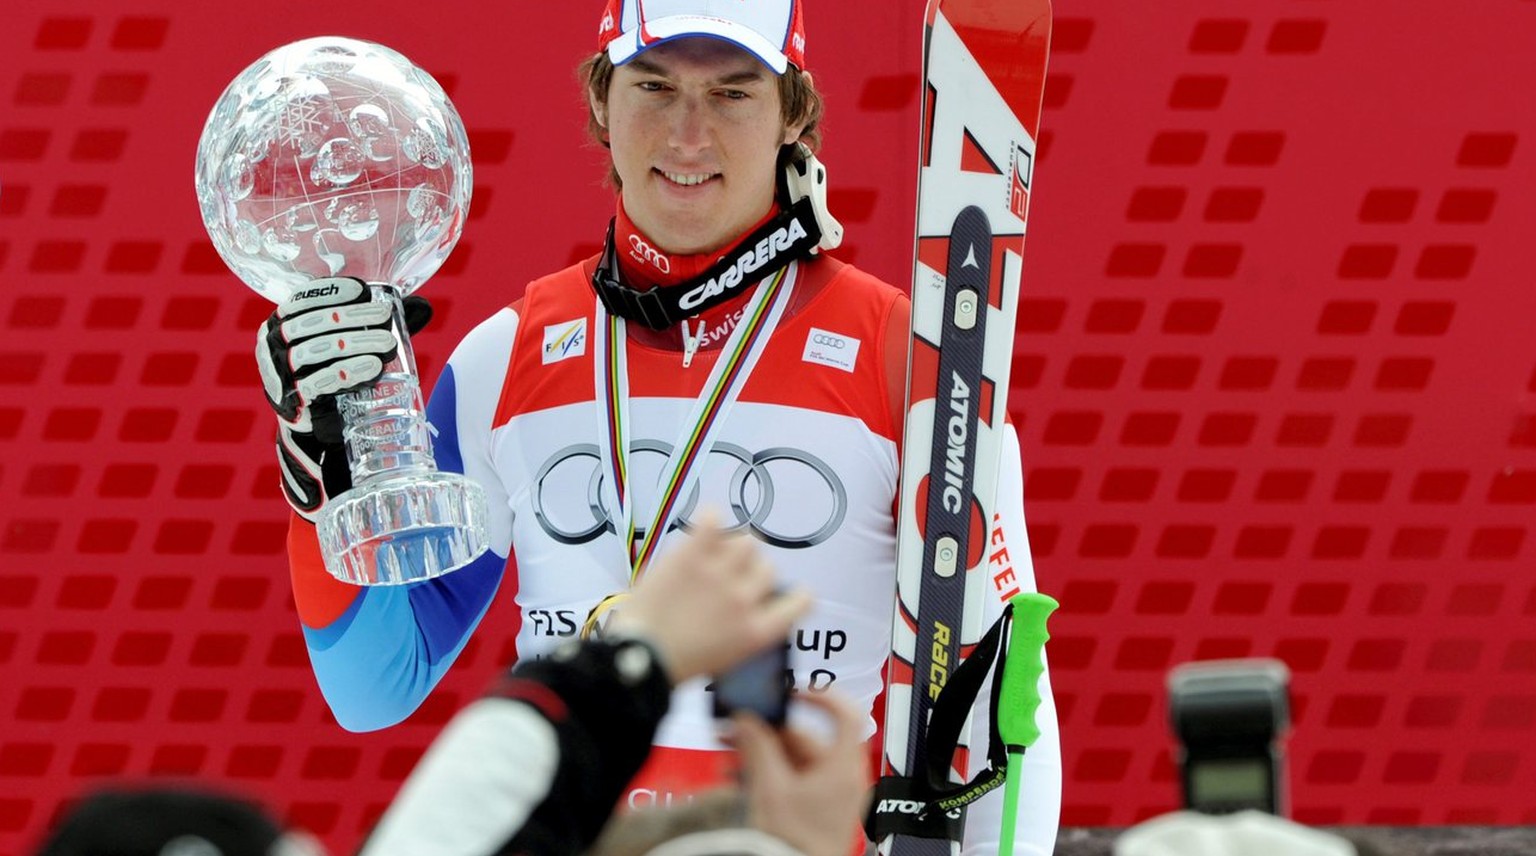 epa02077999 Alpine Skiing World Cup overall winner Carlo Janka from Switzerland poses for photographers with the crystal ball on the podium during the World Cup finals in Garmisch-Partenkirchen, Germa ...